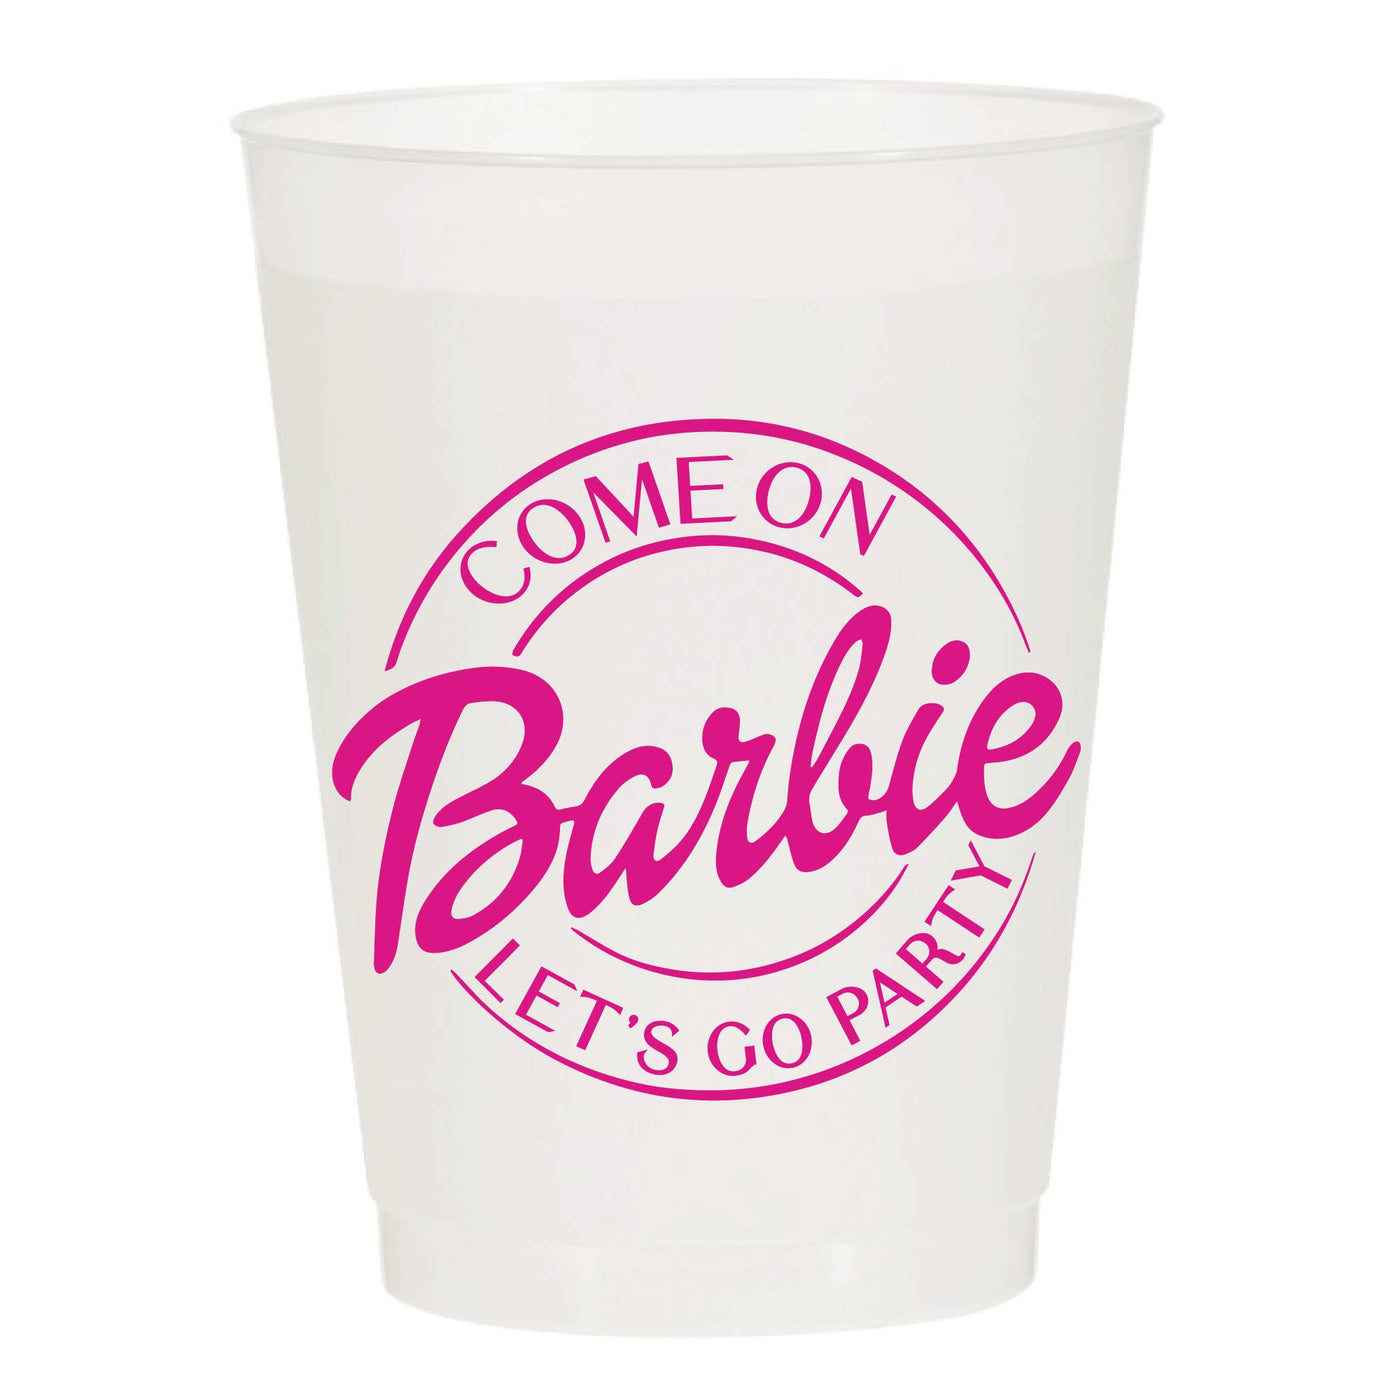 Come on Barbie Let's Go Party Frosted Cups - Girls